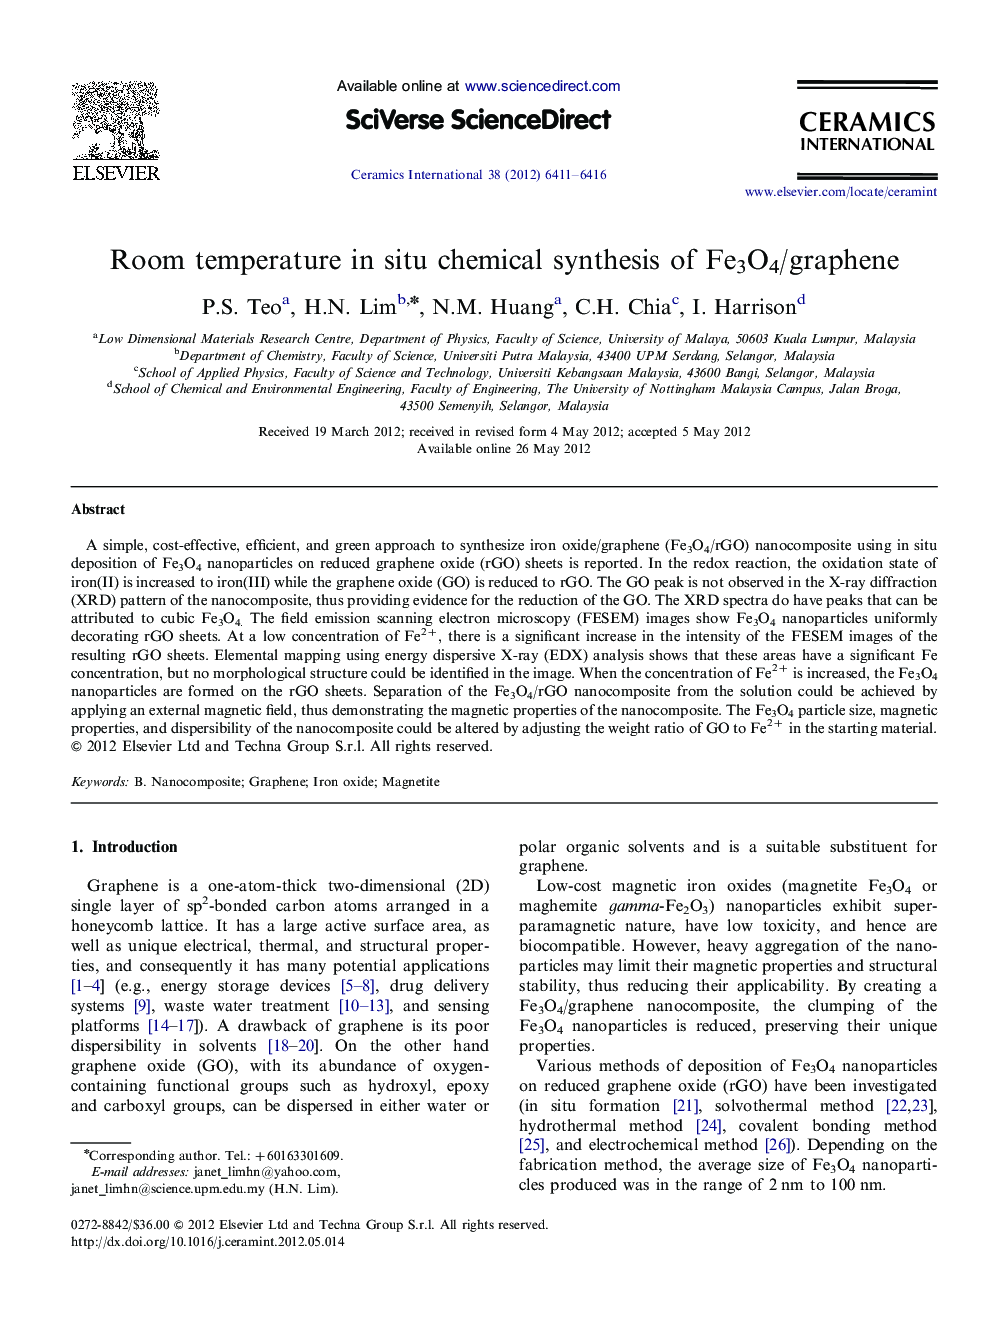 Room temperature in situ chemical synthesis of Fe3O4/graphene